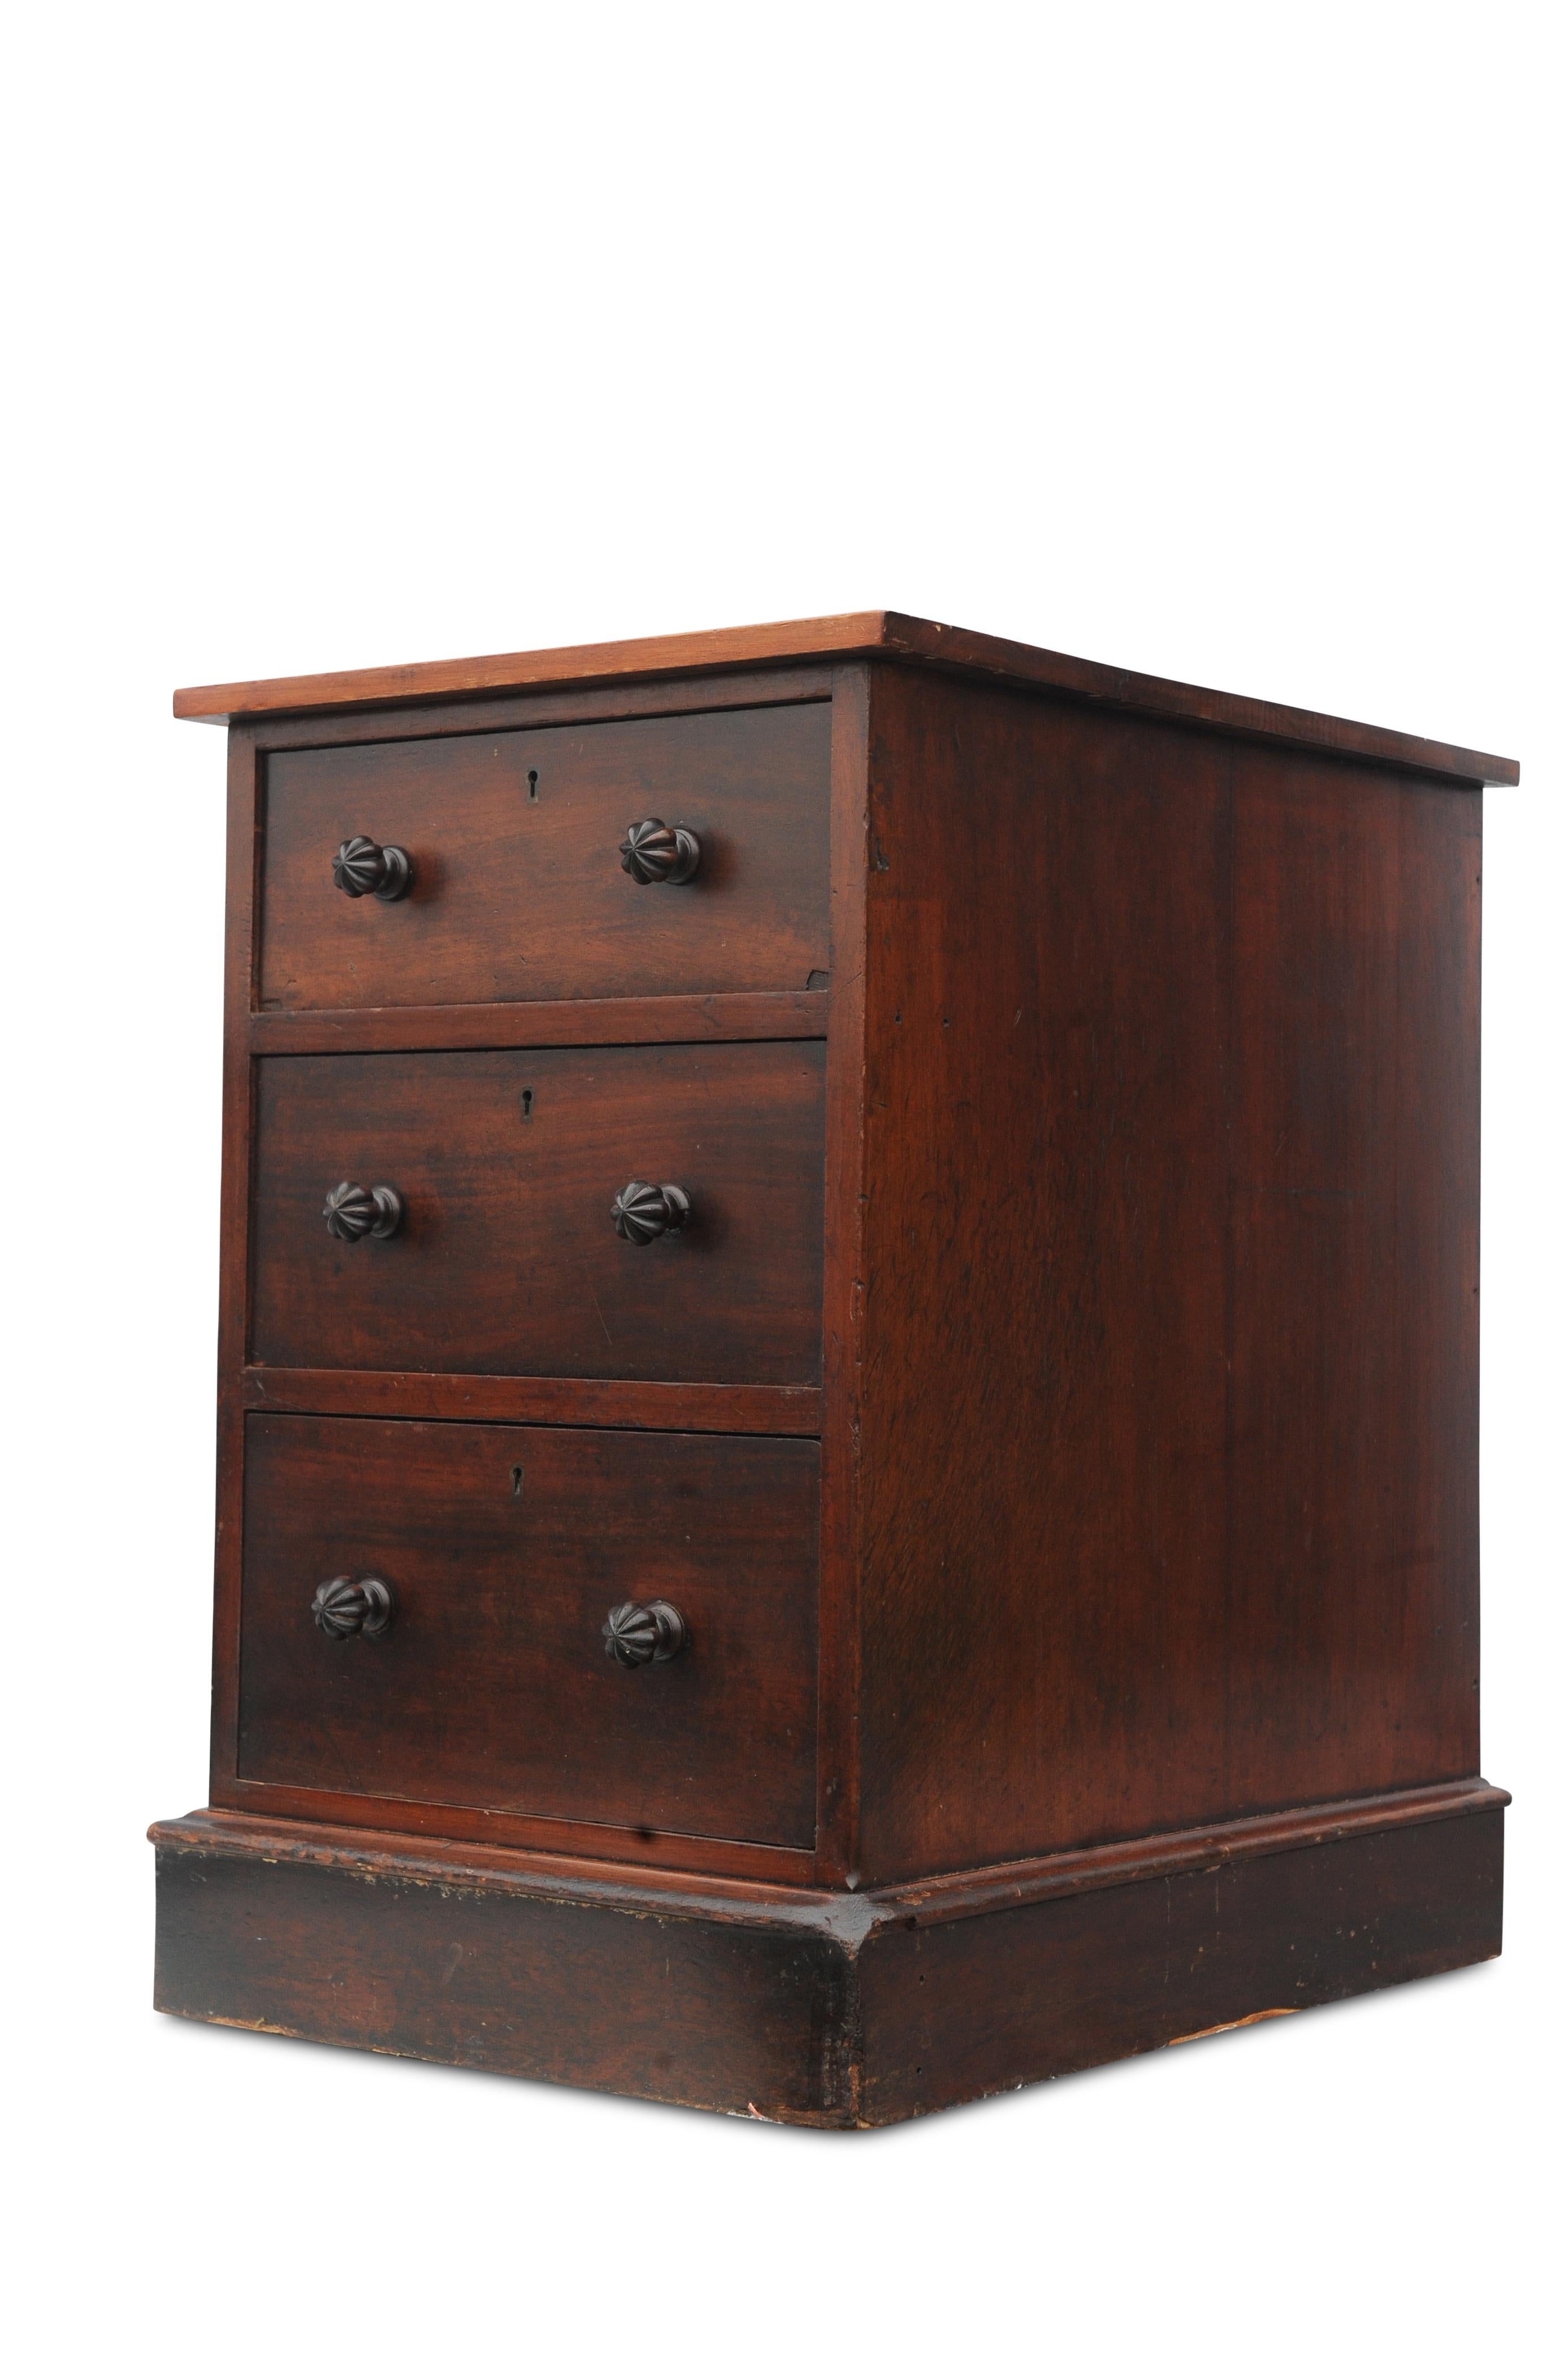 English A Fine Set of George III Three Drawer Nightstands W Priest Blackfriars 1790-1850 For Sale